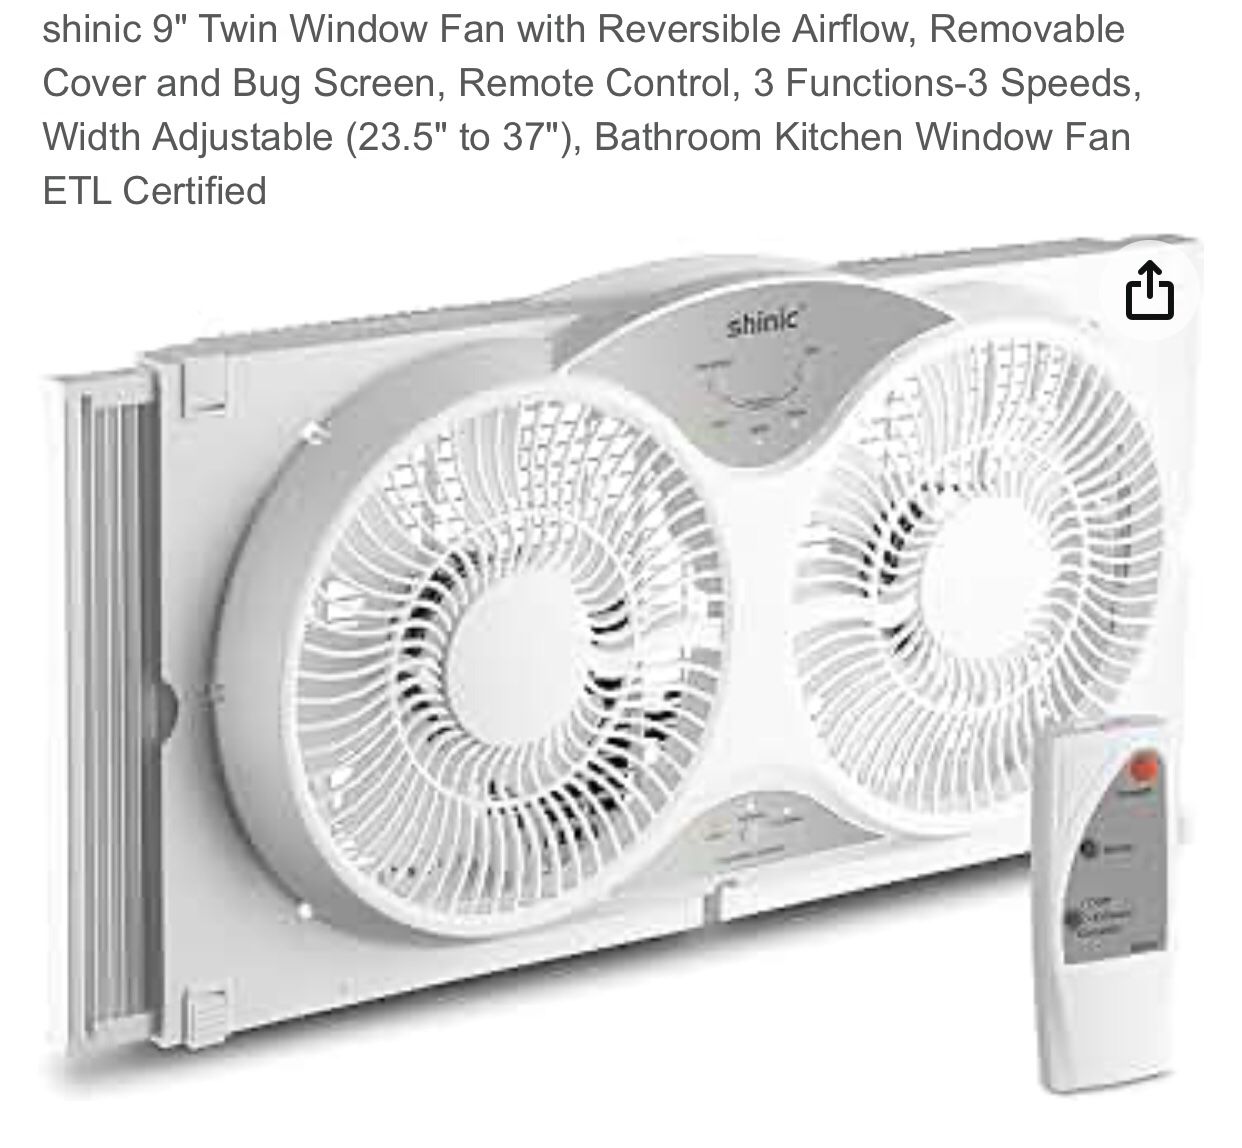 GREAT DEAL!!! shinic Window Fan with Reversible Airflow Quiet Twin 9" Blades Full Remote Control